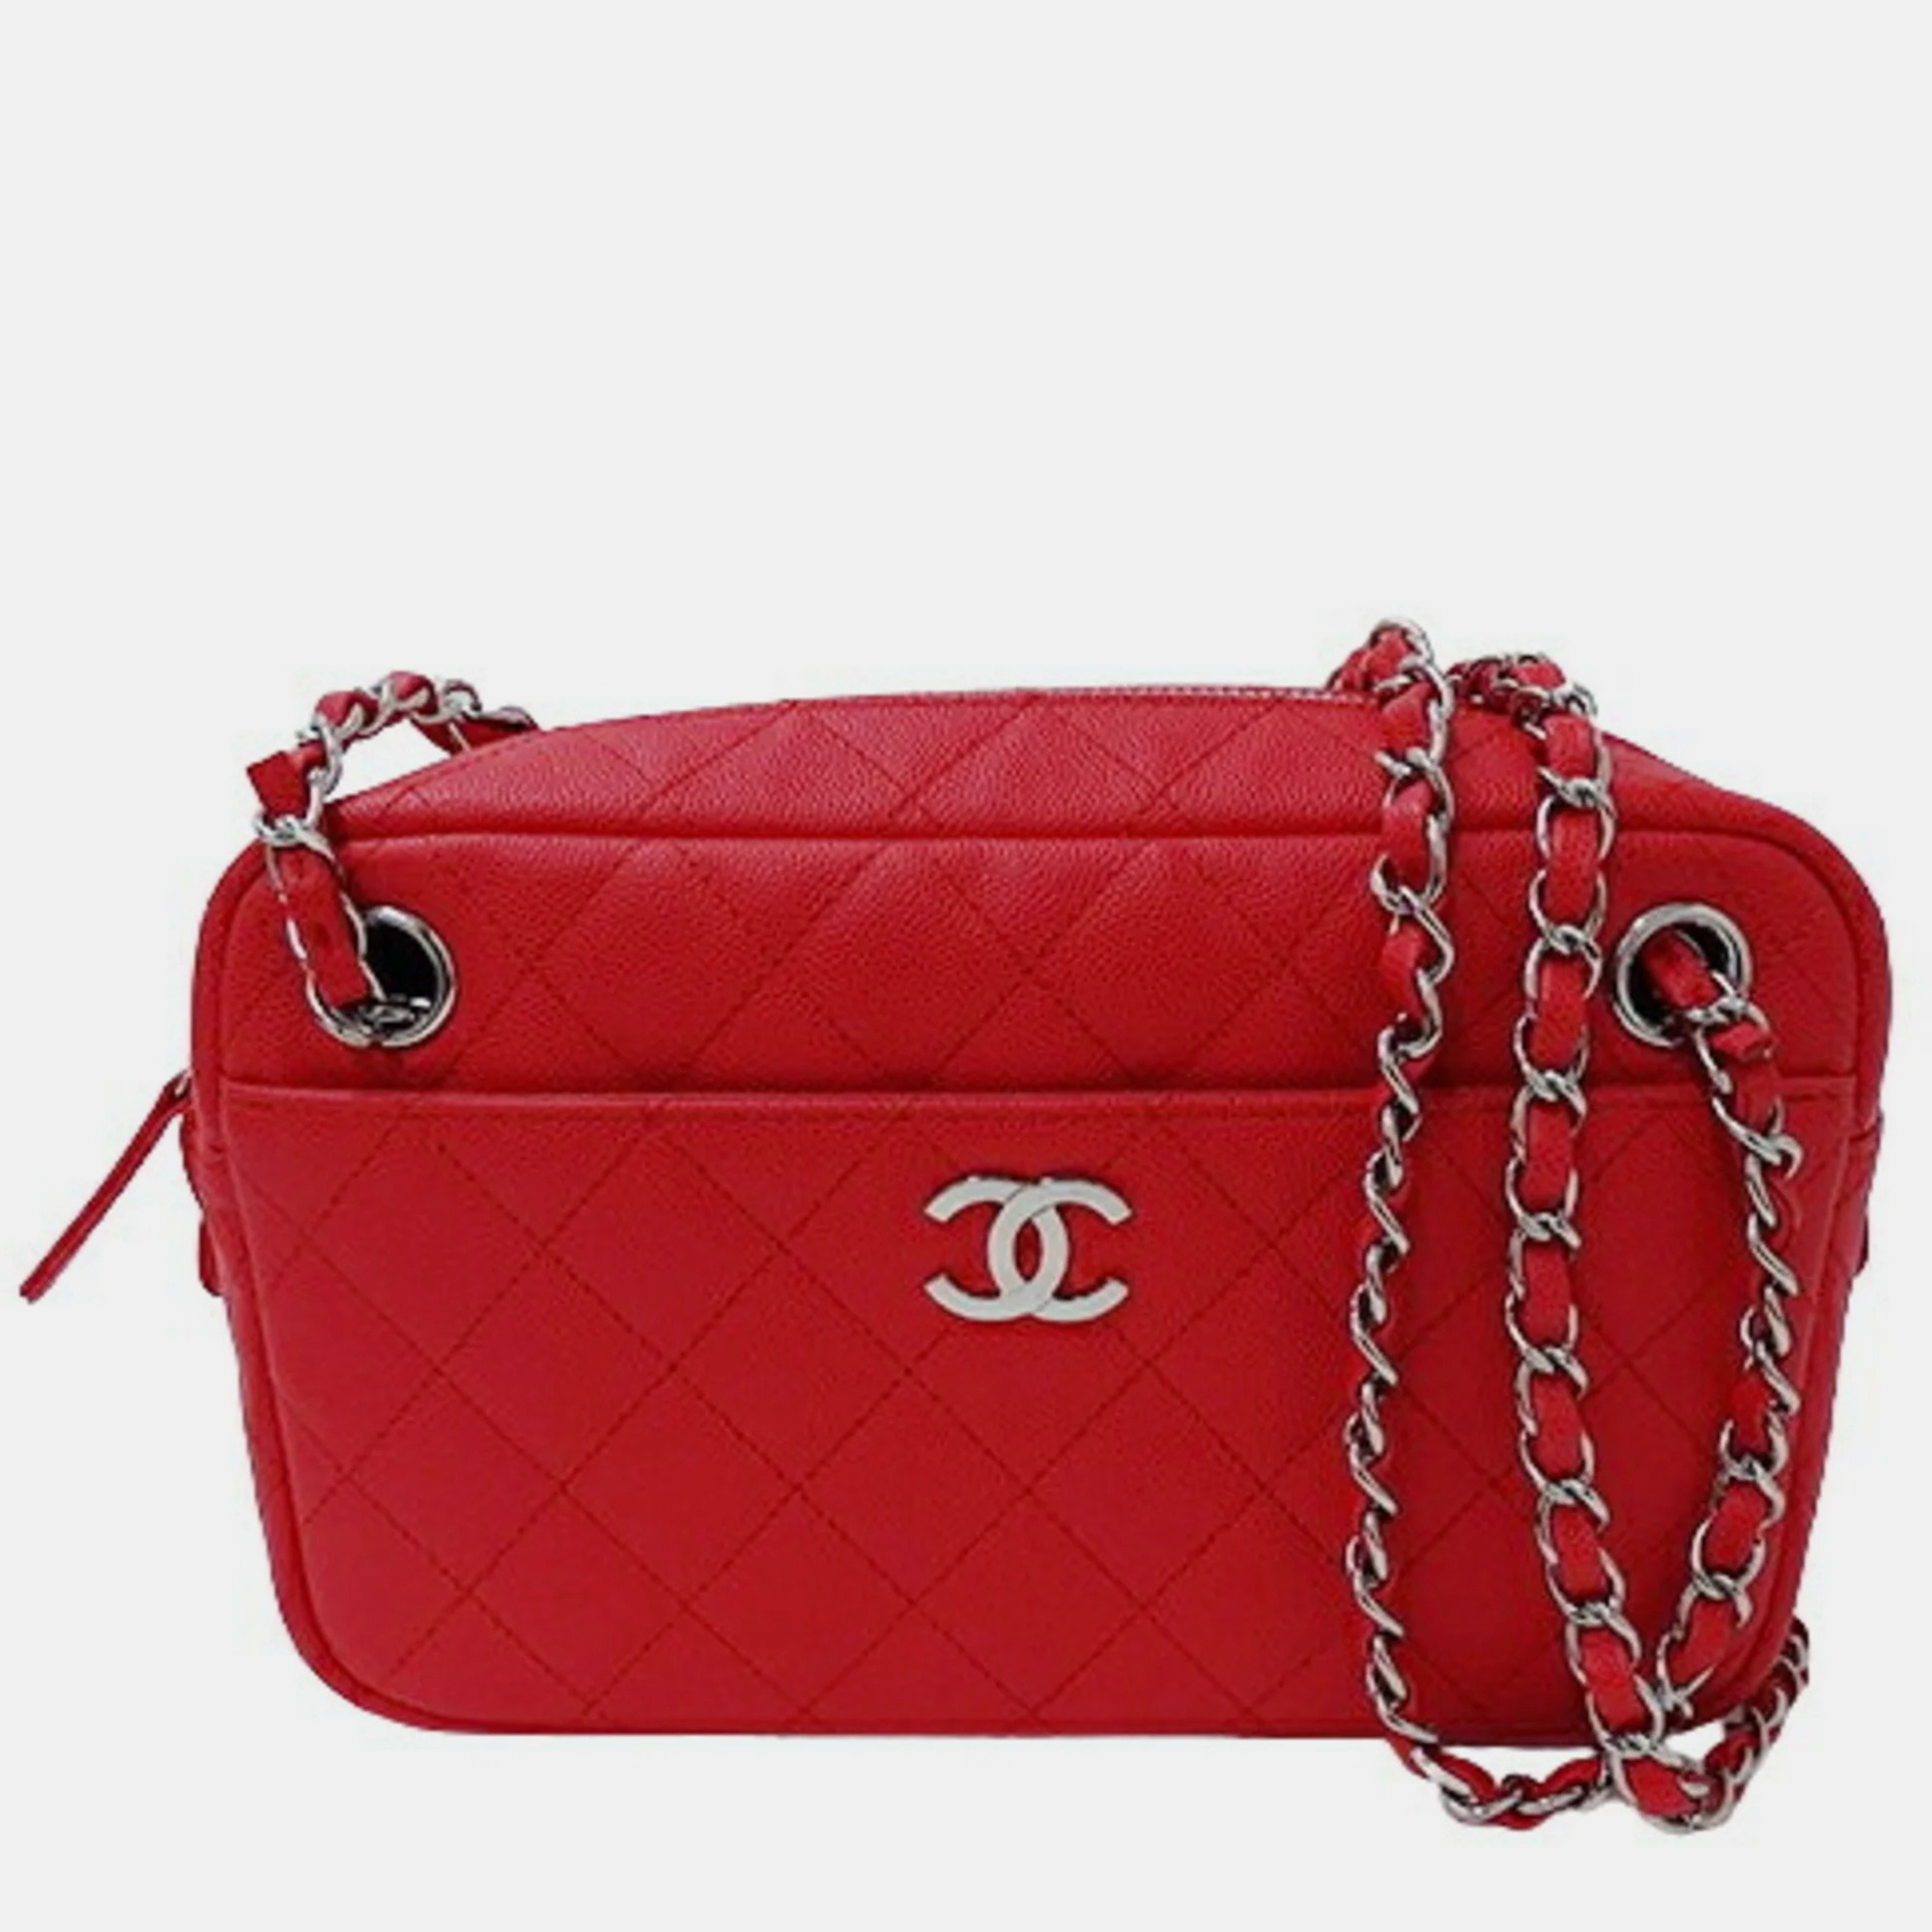 Chanel red caviar leather casual trip camera bag